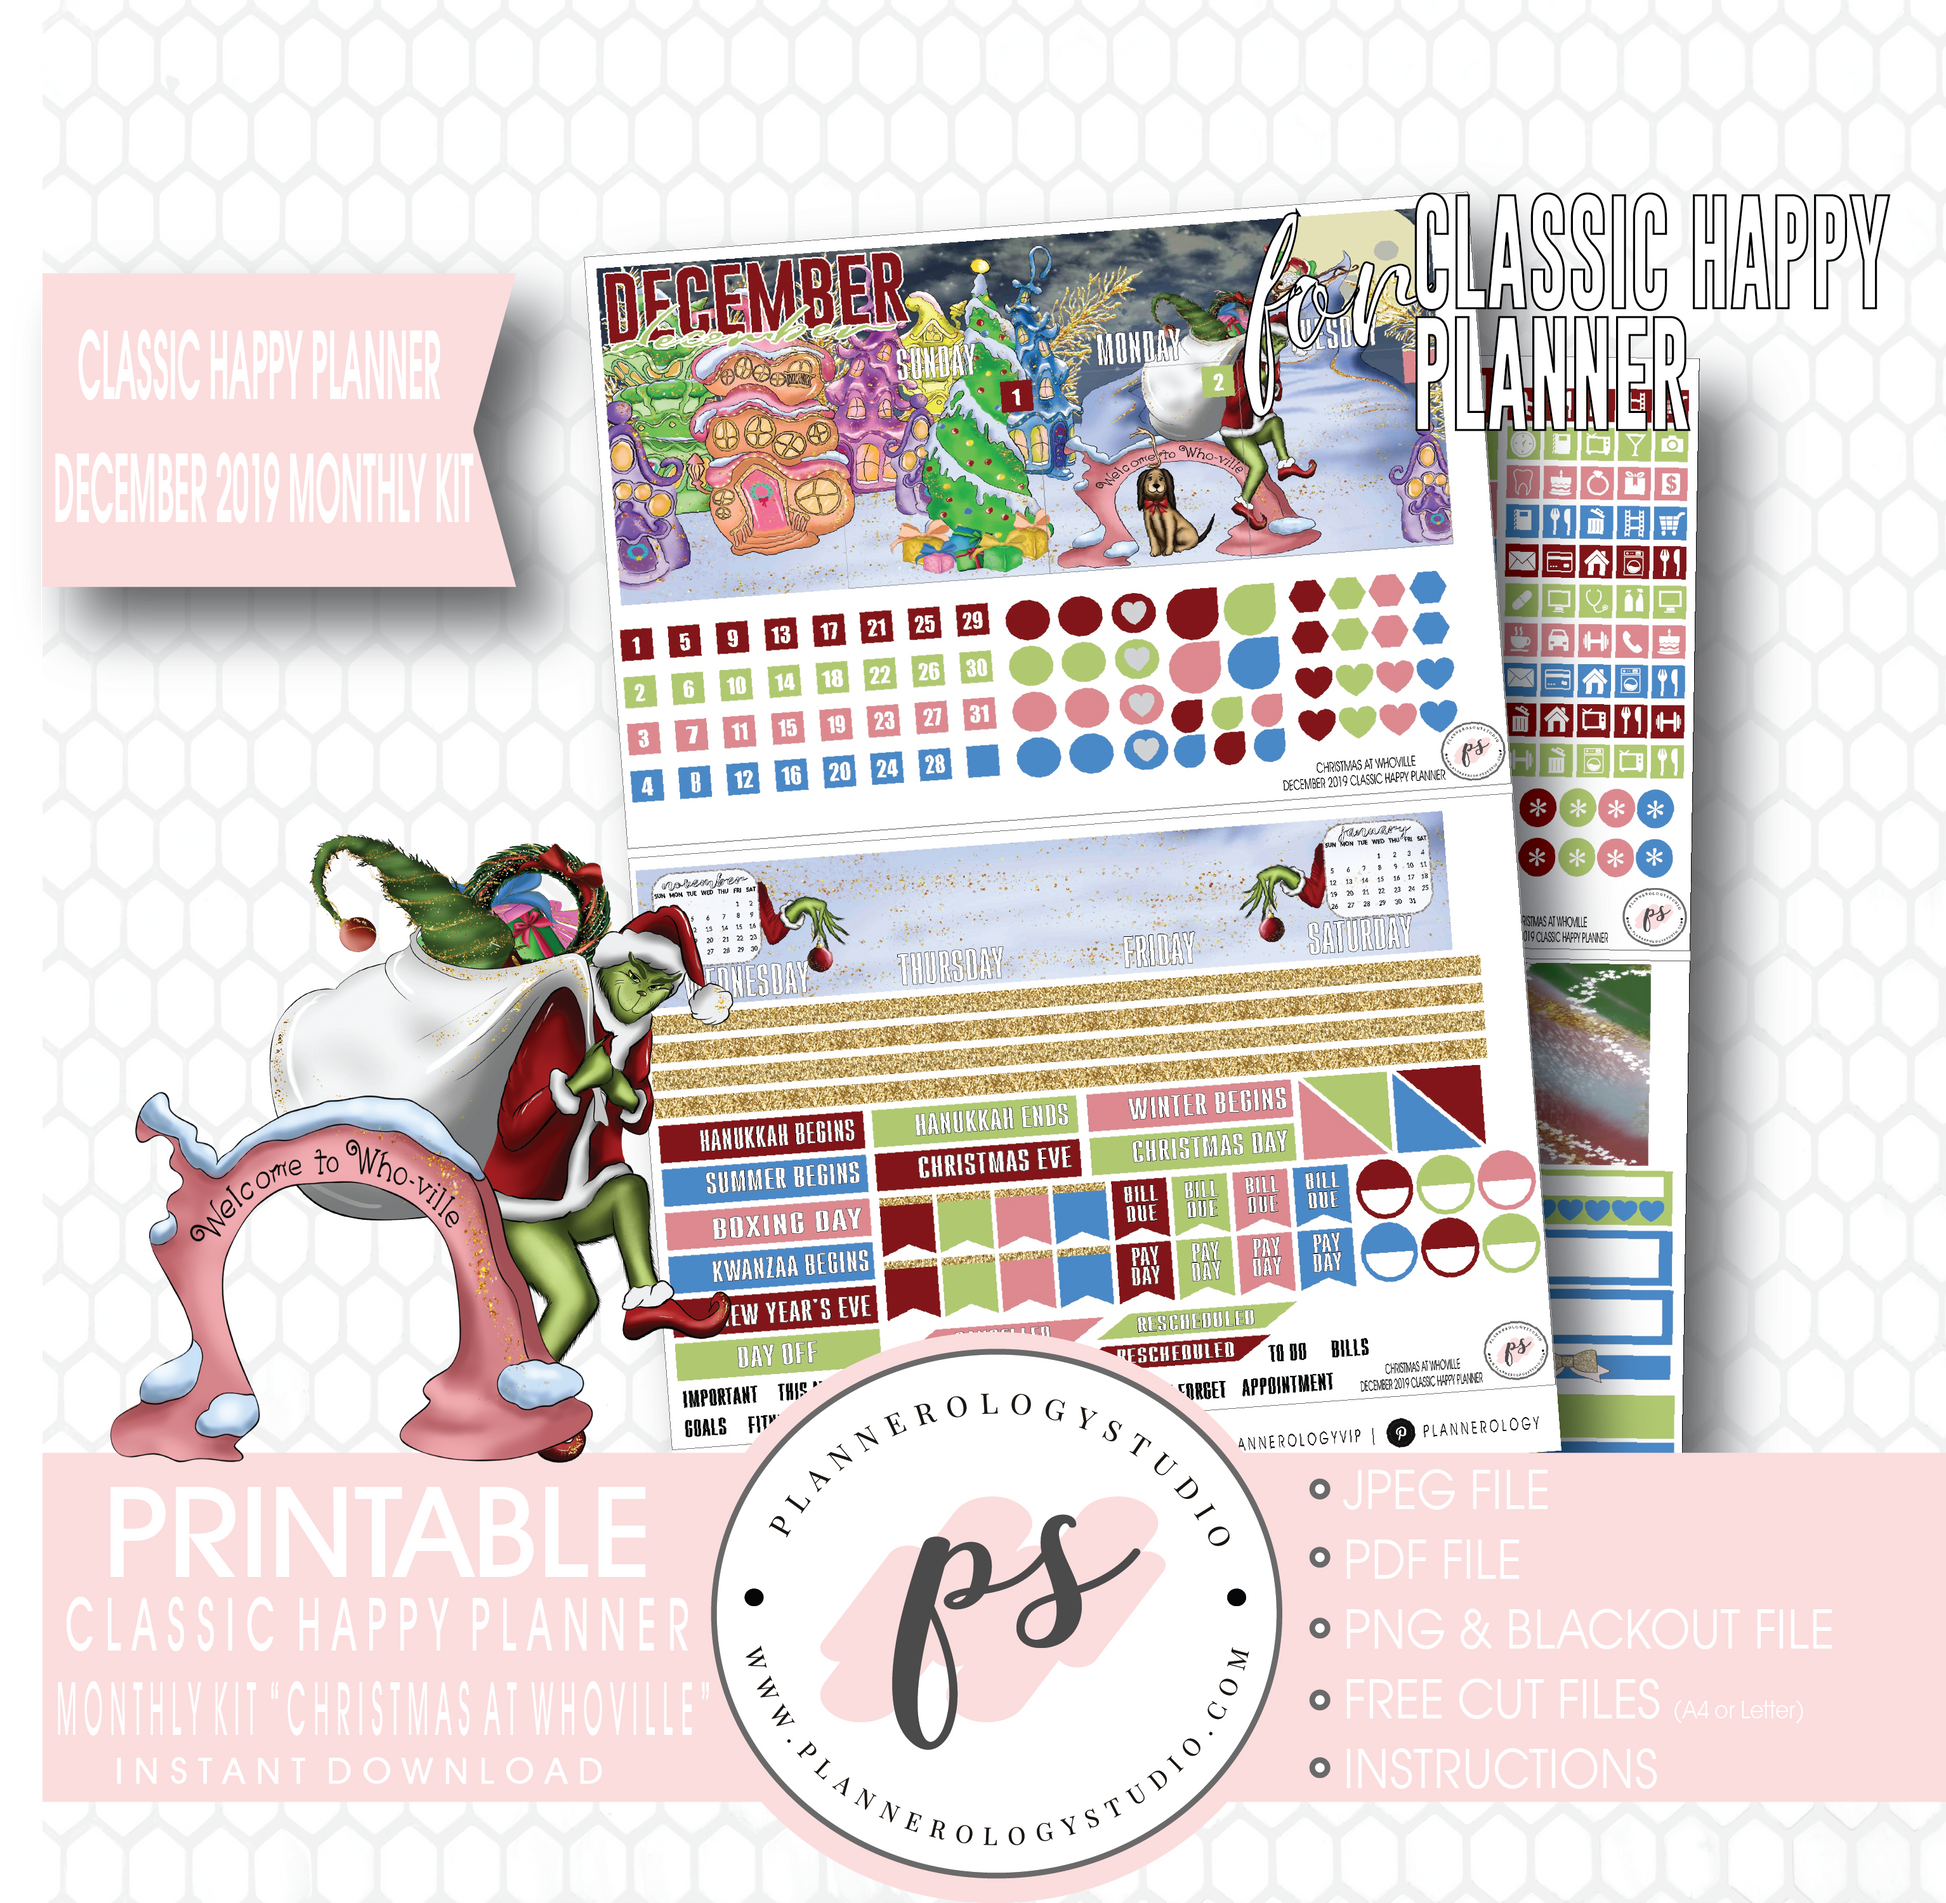 Christmas at Whoville (Grinch) December 2019 Monthly View Kit Digital Printable Planner Stickers (for use with Classic Happy Planner) - Plannerologystudio